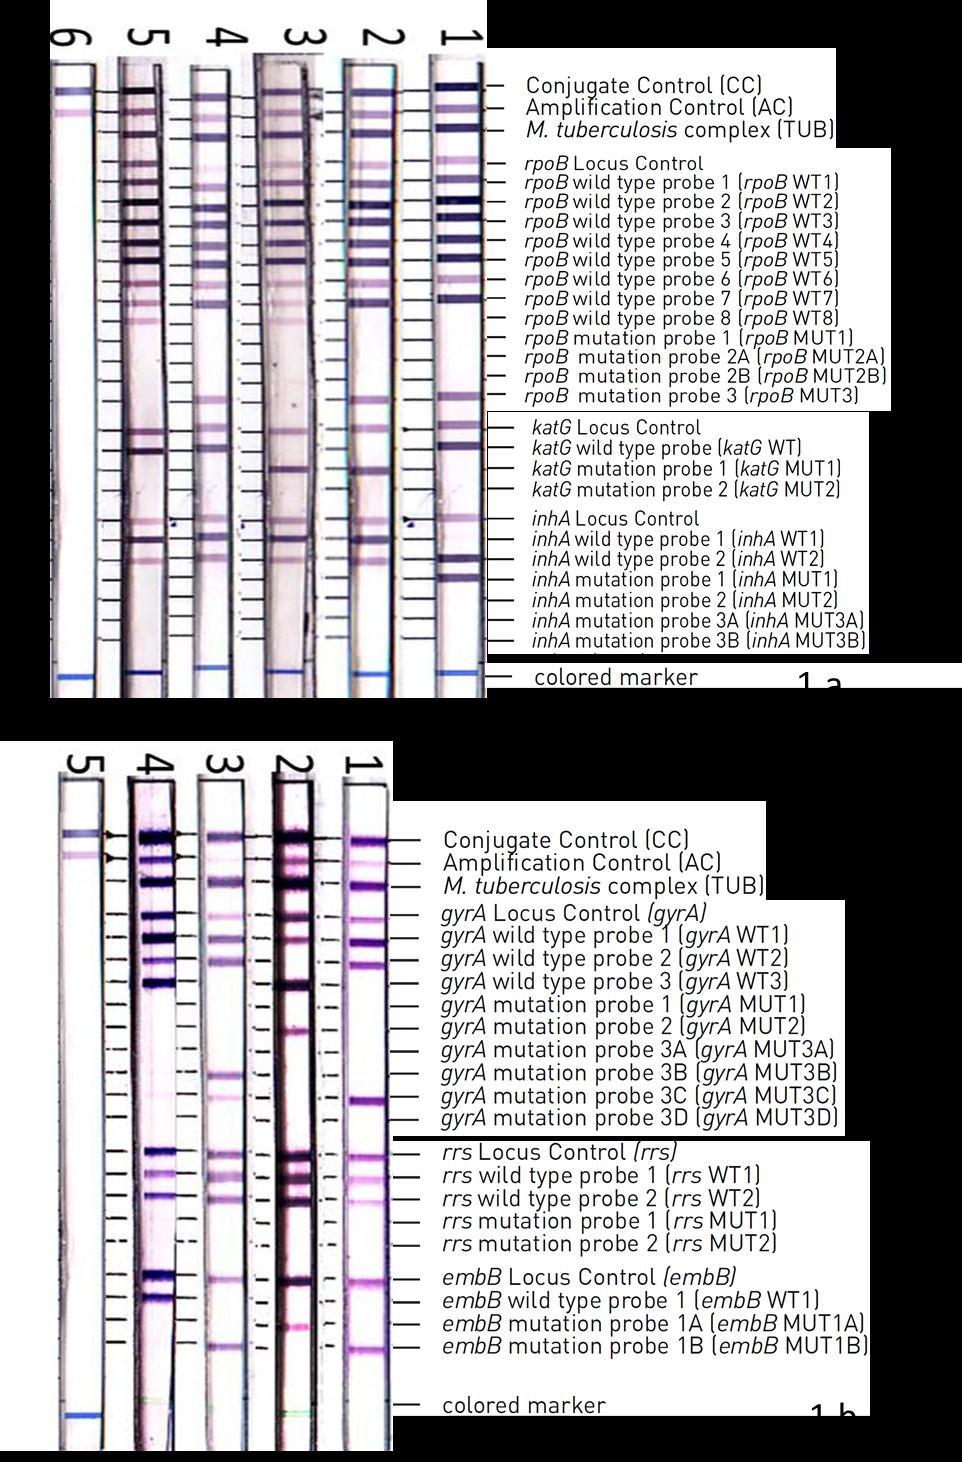 Figure 1. 1a. Examples of GenoTypeMTDBRplus strips (Hain Lifescience, Nehren, Germany). (Lane 1) Multidrugresistant tuberculosis (MDR TB), rpob S531L mutation and inha C15T mutations.